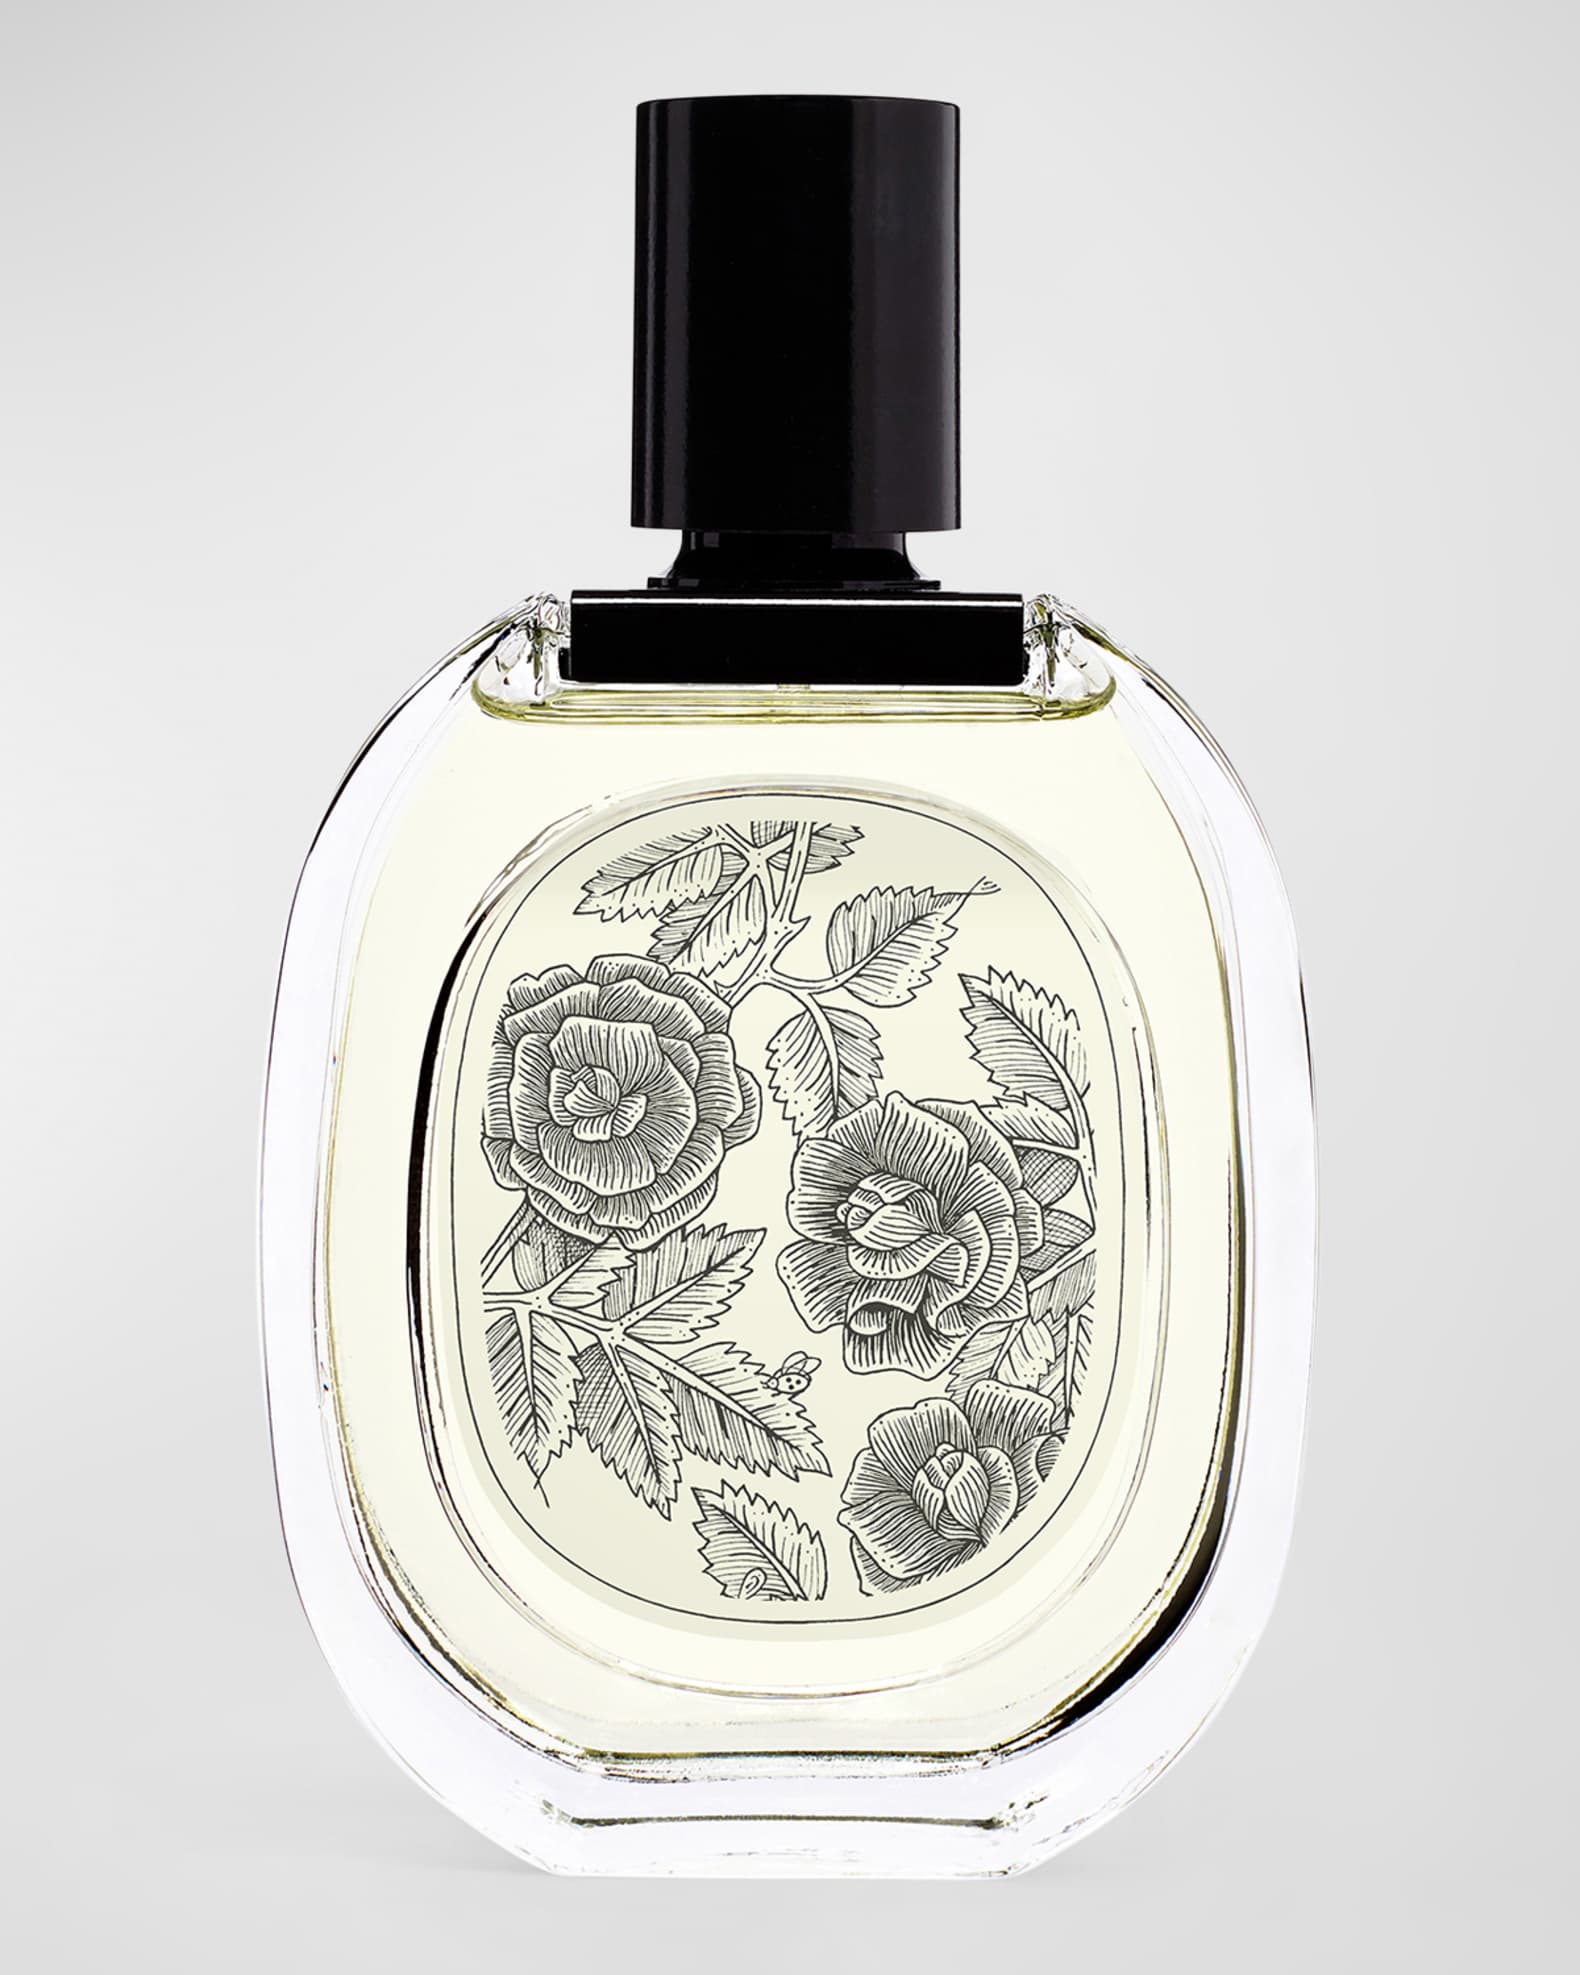 Louis Vuitton on X: Elevating fragrance to art. With a new cap by